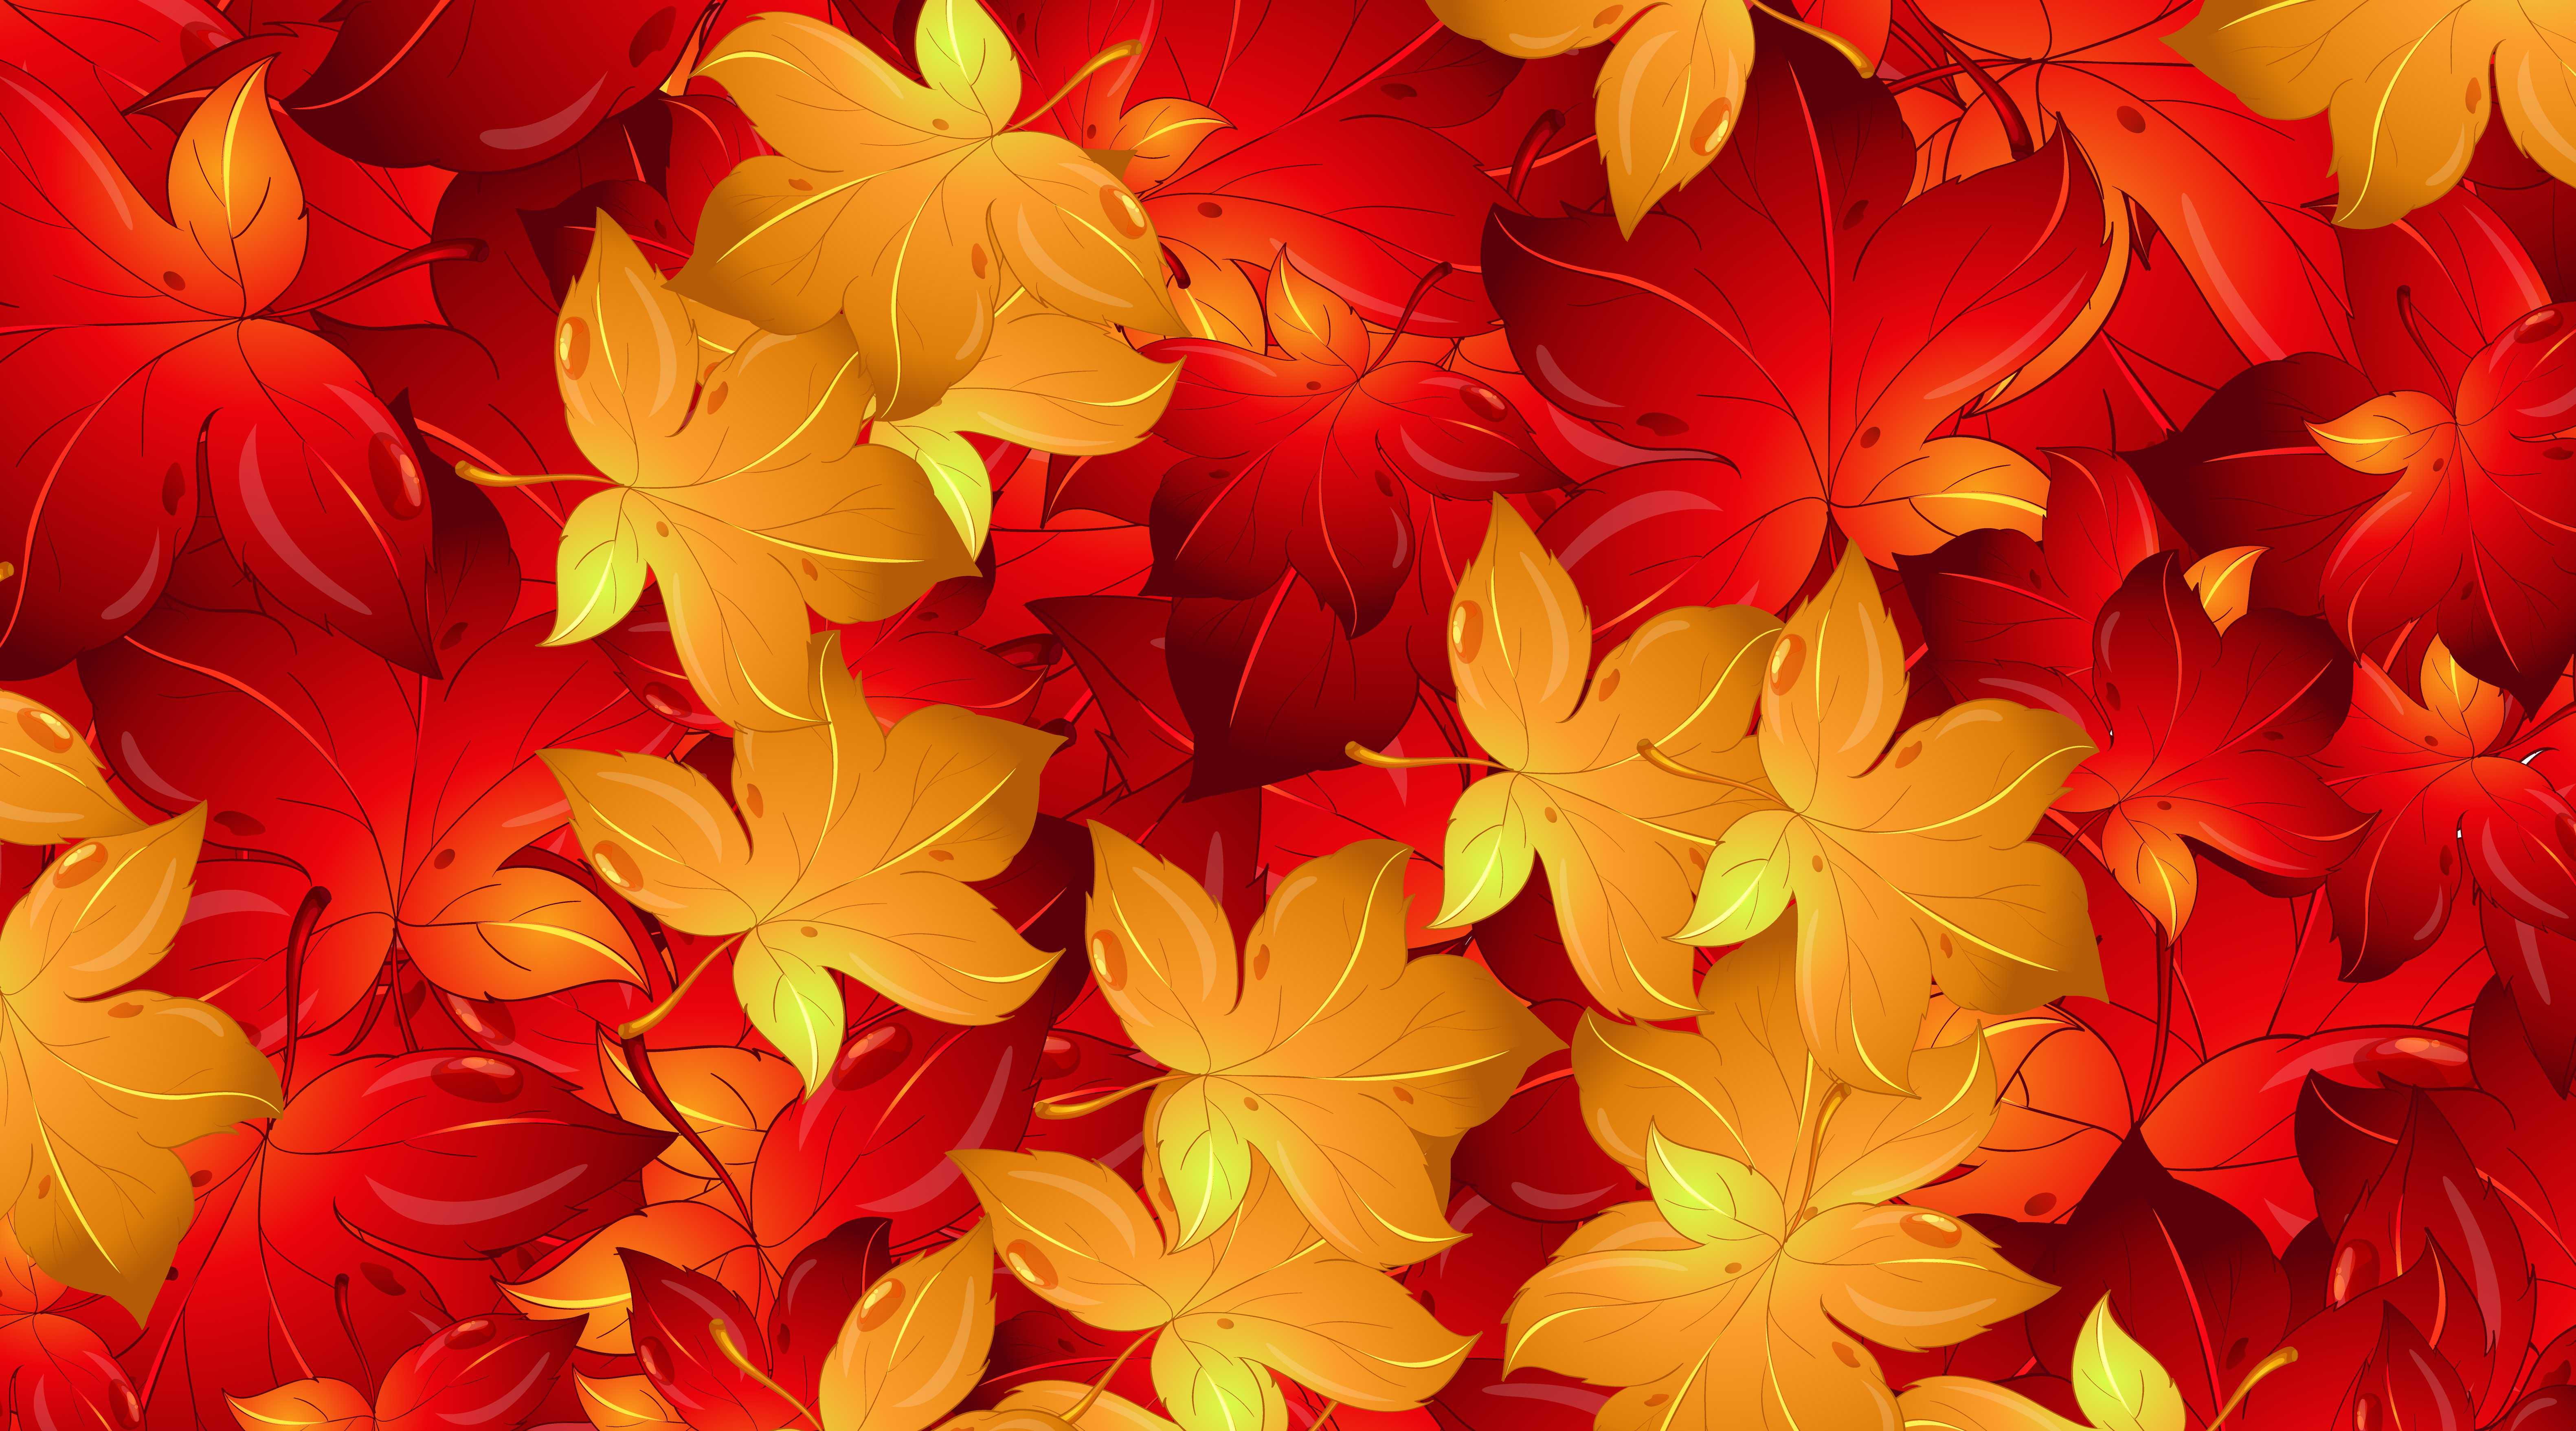 Background Design Template With Red Leaves Download Free Vectors Clipart Graphics Vector Art